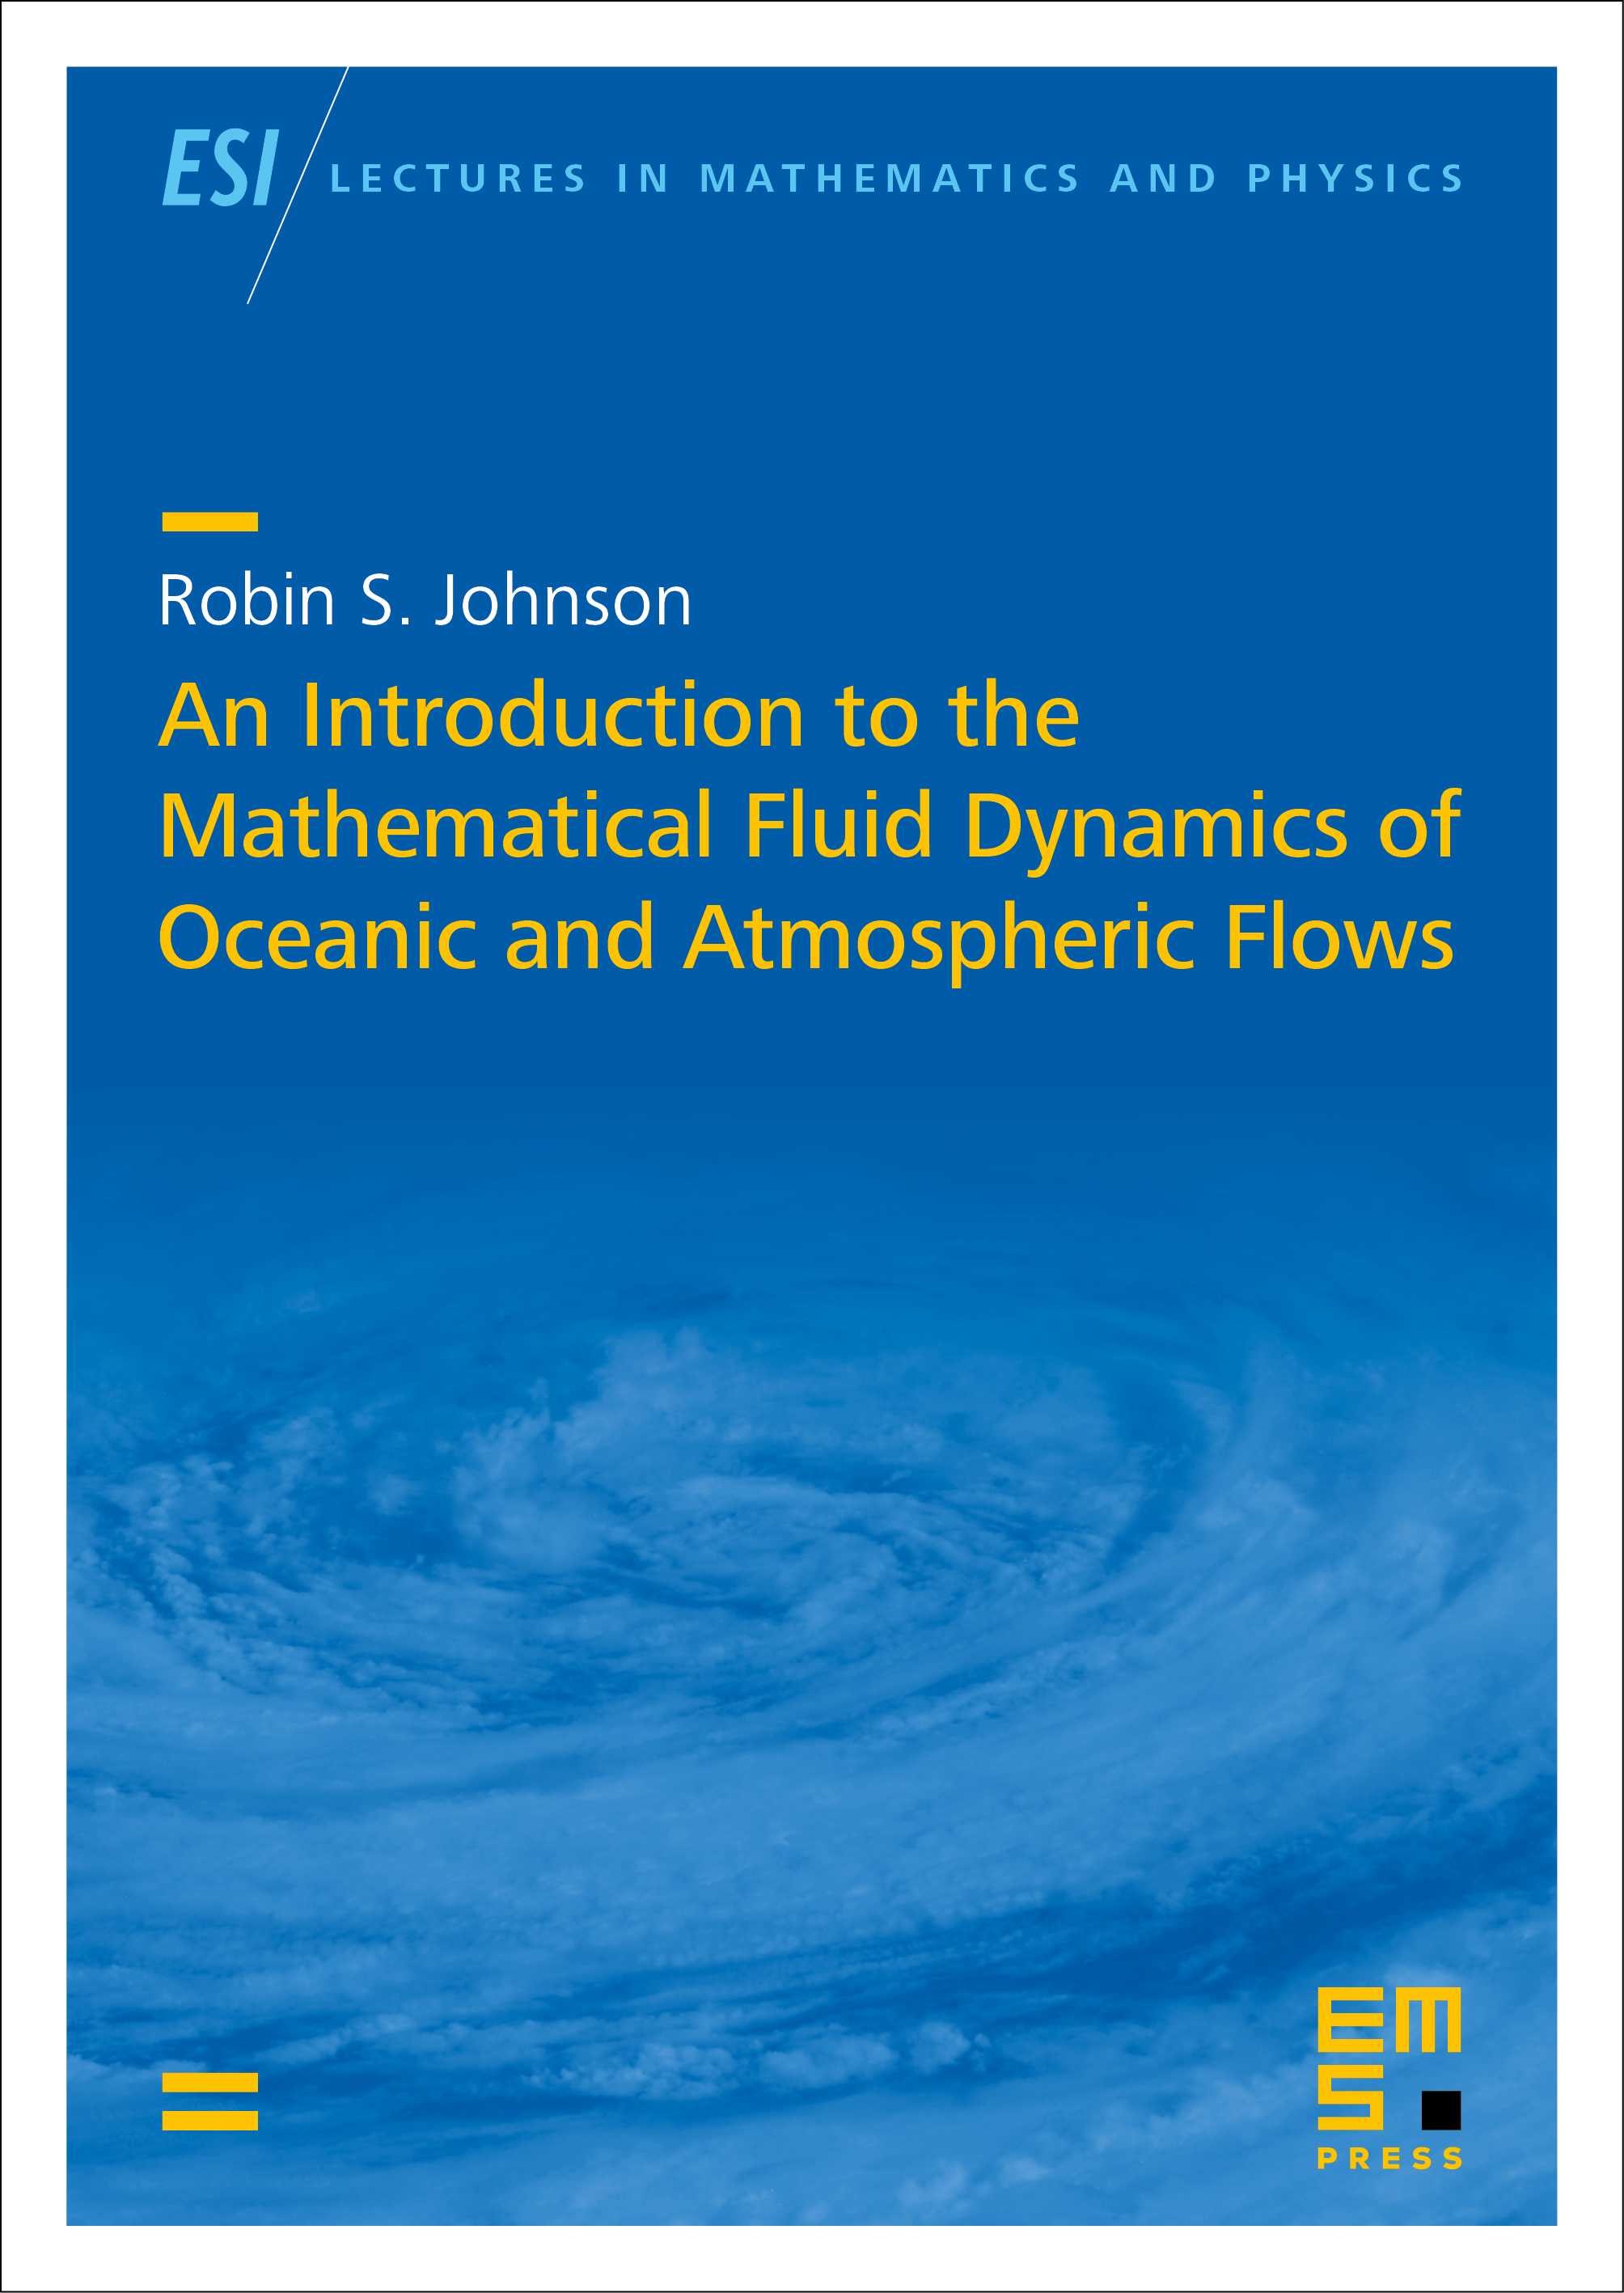 Unsteady atmospheric flows cover